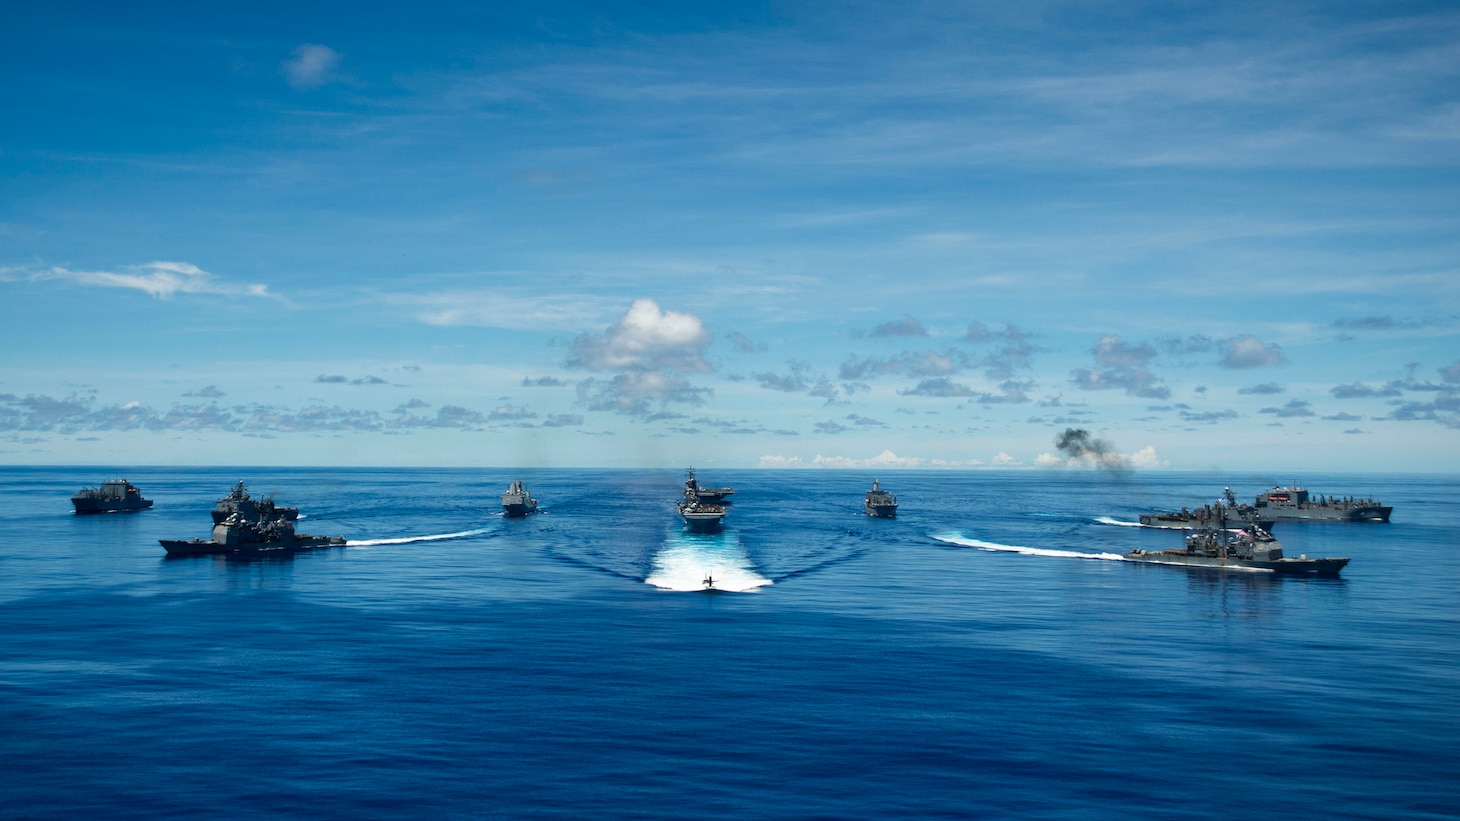 PHILIPPINE SEA (Sept. 25, 2020) From left, USNS Charles Drew (T-AKE 10), USS Comstock (LSD 45), USS Shiloh (CG 67), USS New Orleans (LPD 18), USS Chicago (SSN 721), USS America (LHA 6), USS Ronald Reagan (CVN 76), USNS John Ericsson (T-AO 194), USS Antietam (CG 54), USS Germantown (LSD 42), and USNS Sacagawea (T-AKE 2) steam in formation while E/A-18G Growlers and FA-18E Super Hornets from Carrier Air Wing (CVW) 5, a P-8 Poseidon from Commander Task Force 72, and U.S. Air Force F-22 Raptors and a B-1B Bomber fly over the formation in support of Valiant Shield 2020. Valiant Shield is a U.S. only, biennial field training exercise (FTX) with a focus on integration of joint training in a blue-water environment among U.S. forces. This training enables real-world proficiency in sustaining joint forces through detecting, locating, tracking and engaging units at sea, in the air, on land and in cyberspace in response to a range of mission areas. (U.S. Navy photo by Mass Communication Specialist 2nd Class Codie Soule)